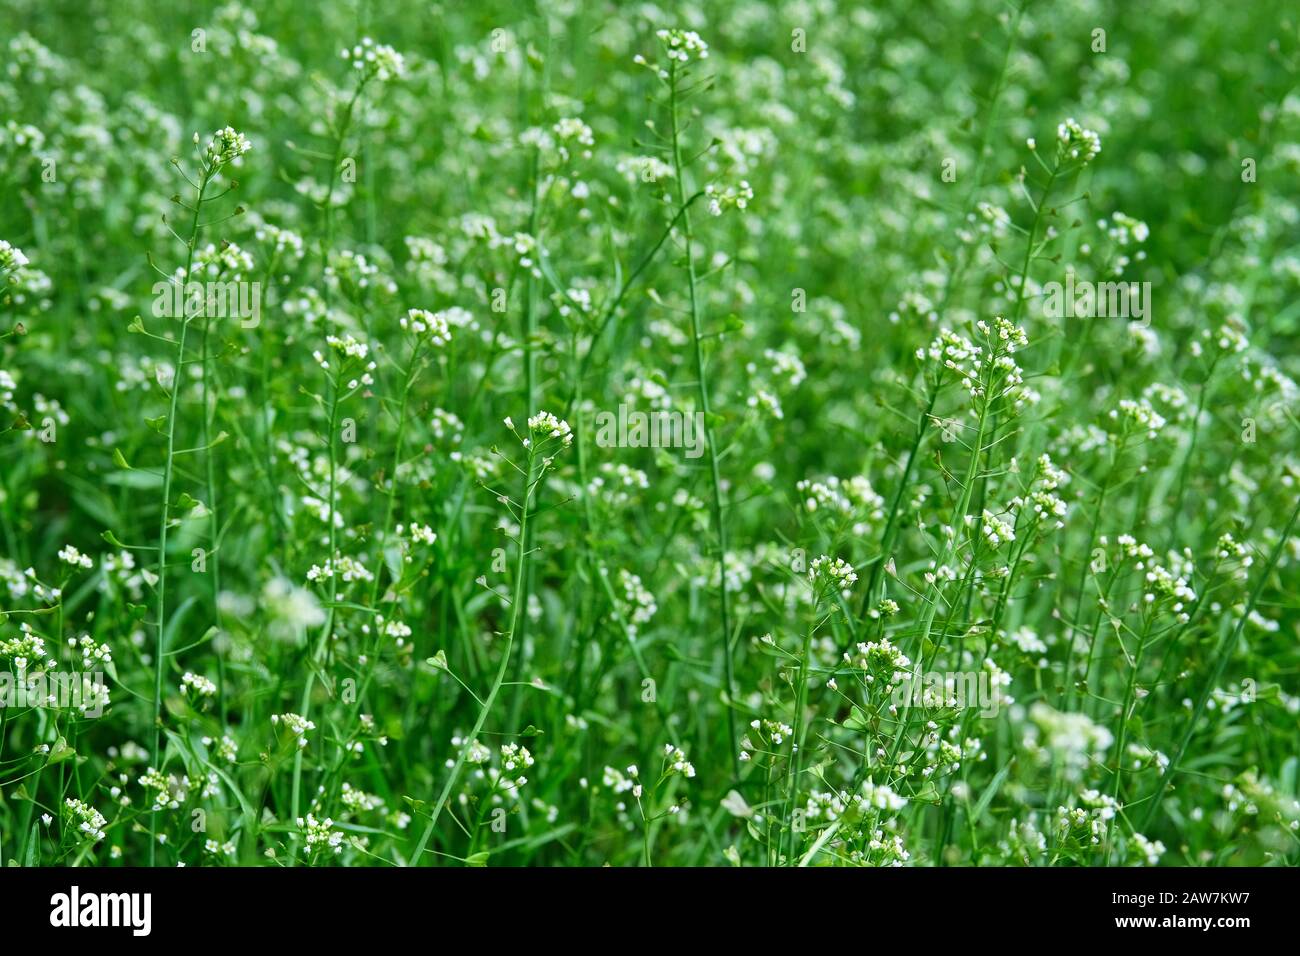 Capsella flowers on green nature blurred background on meadow. Bright wild flowers for herbal medicine. Medicinal herb. Stock Photo